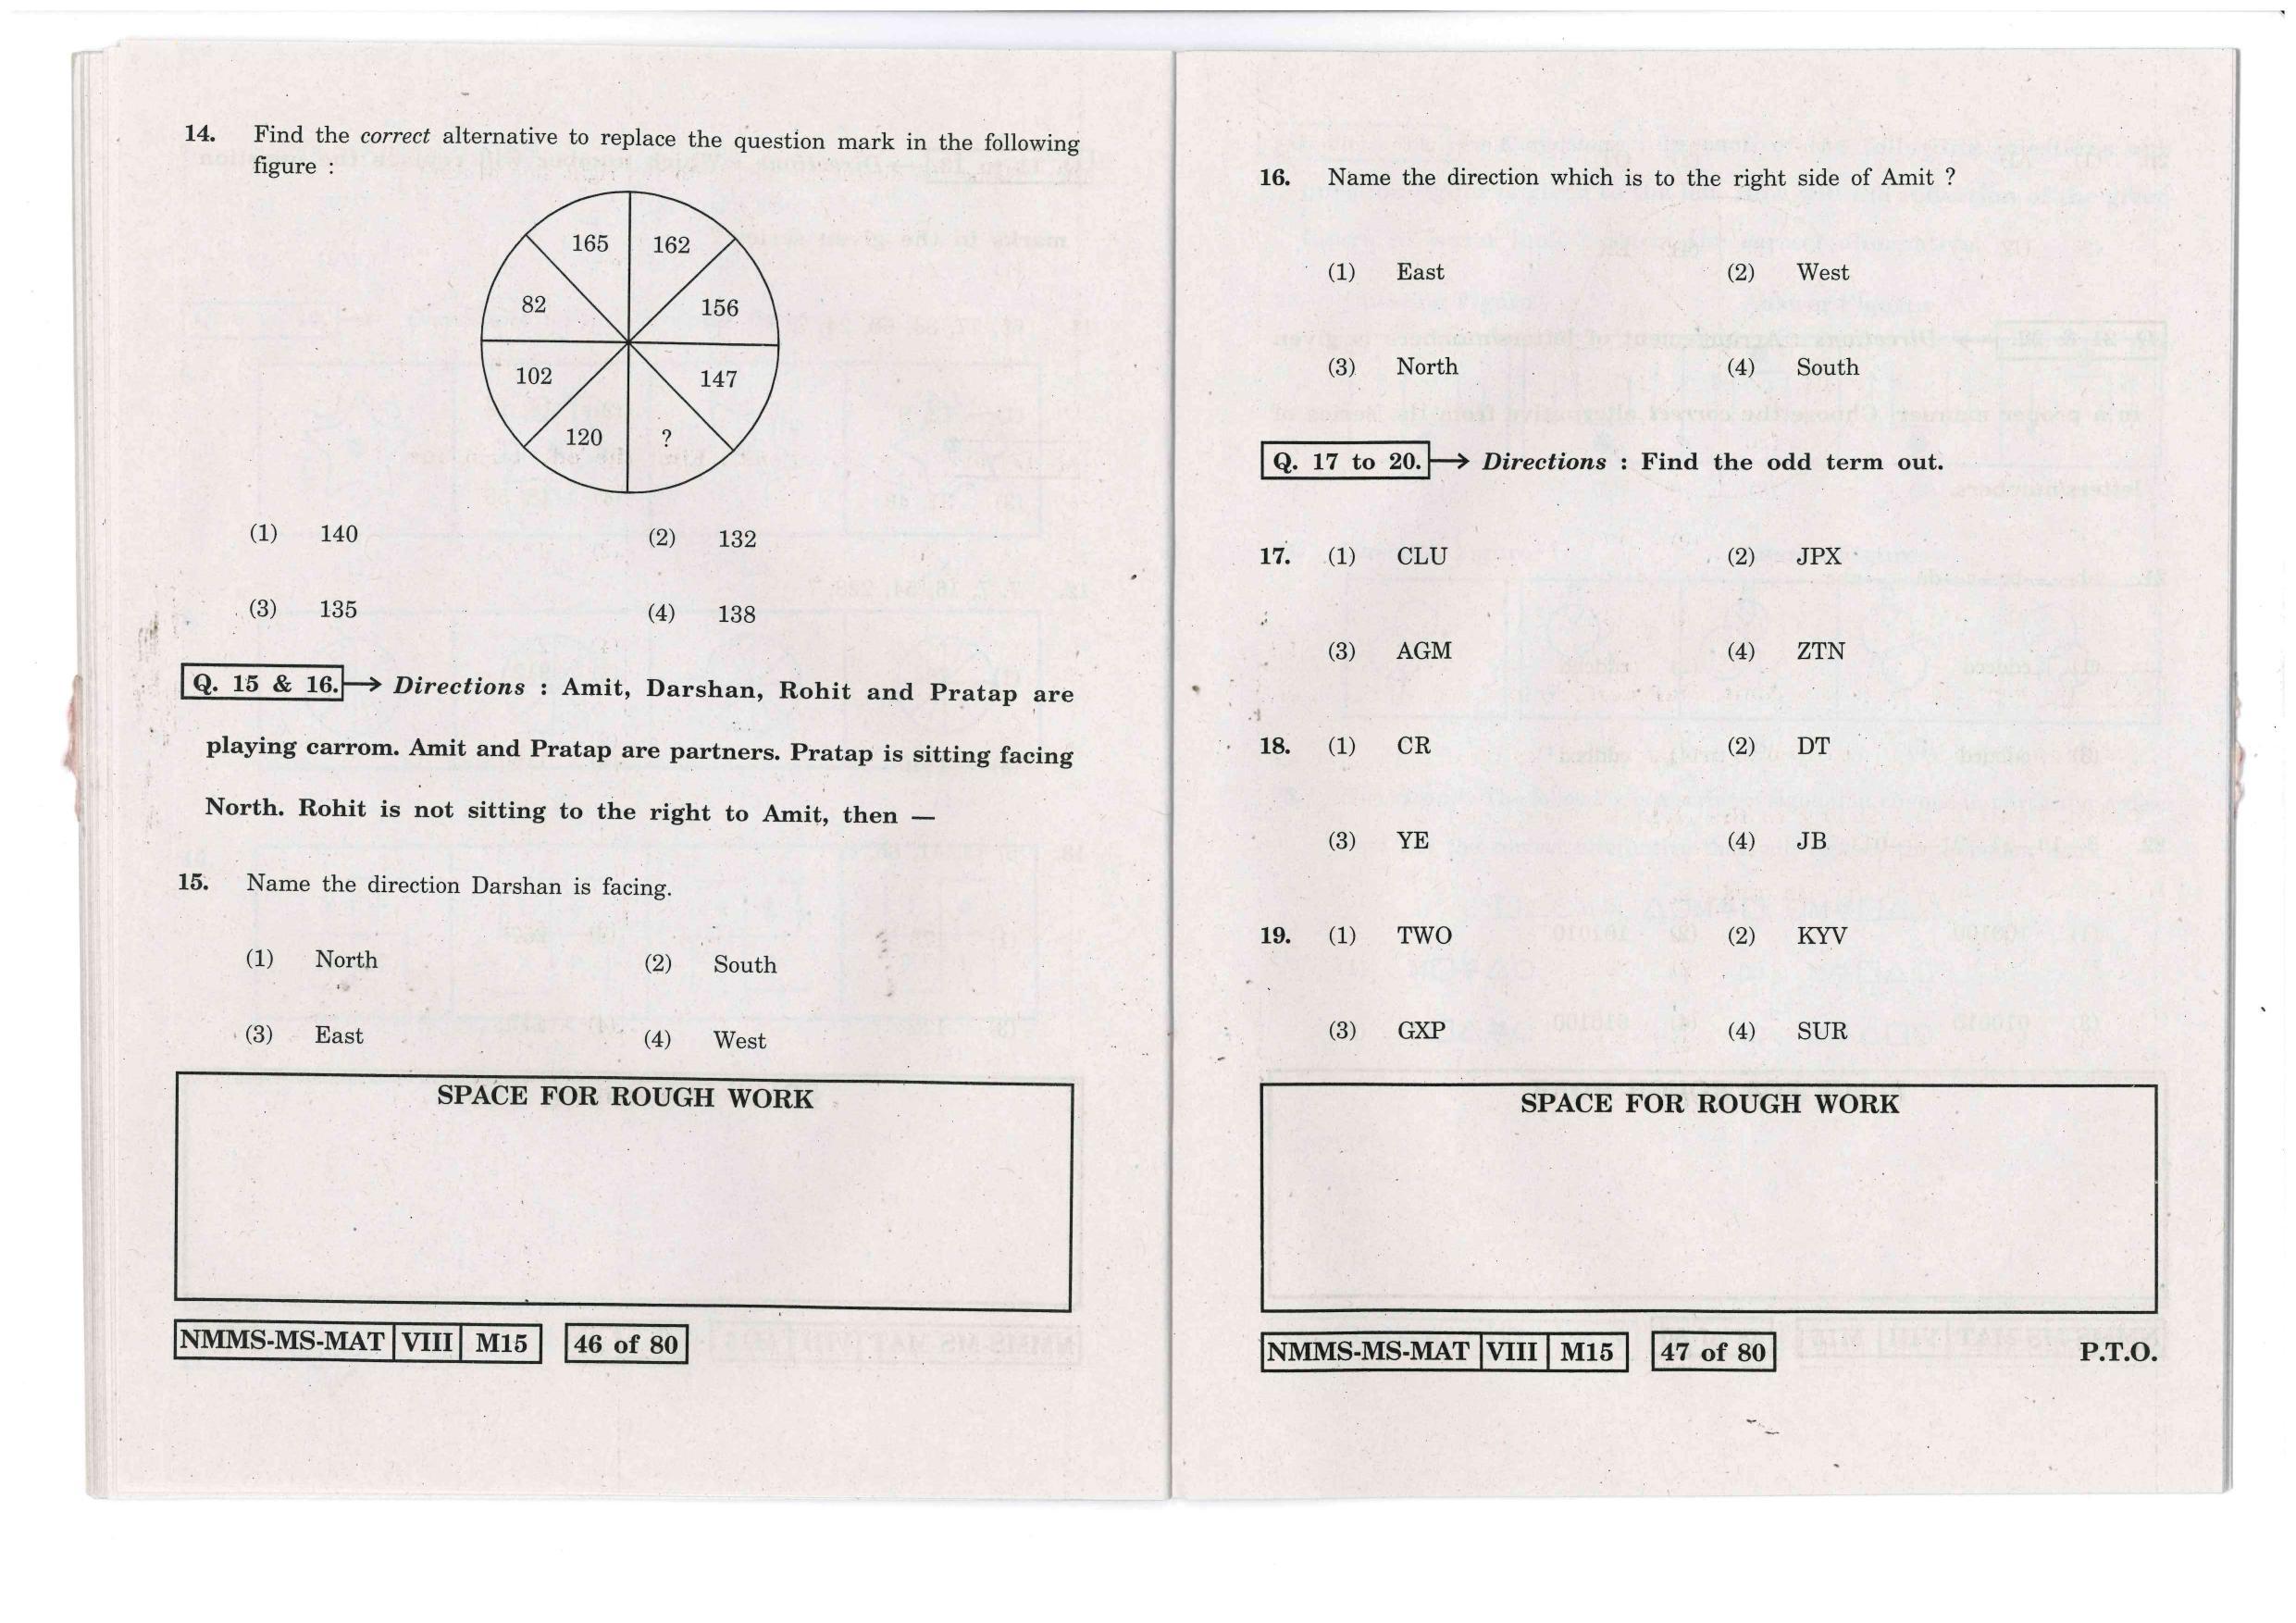 MAT MARATHI WITH ENGLISH VERSION 2016-17 Class 8 Maharashtra NMMS Question Papers - Page 24